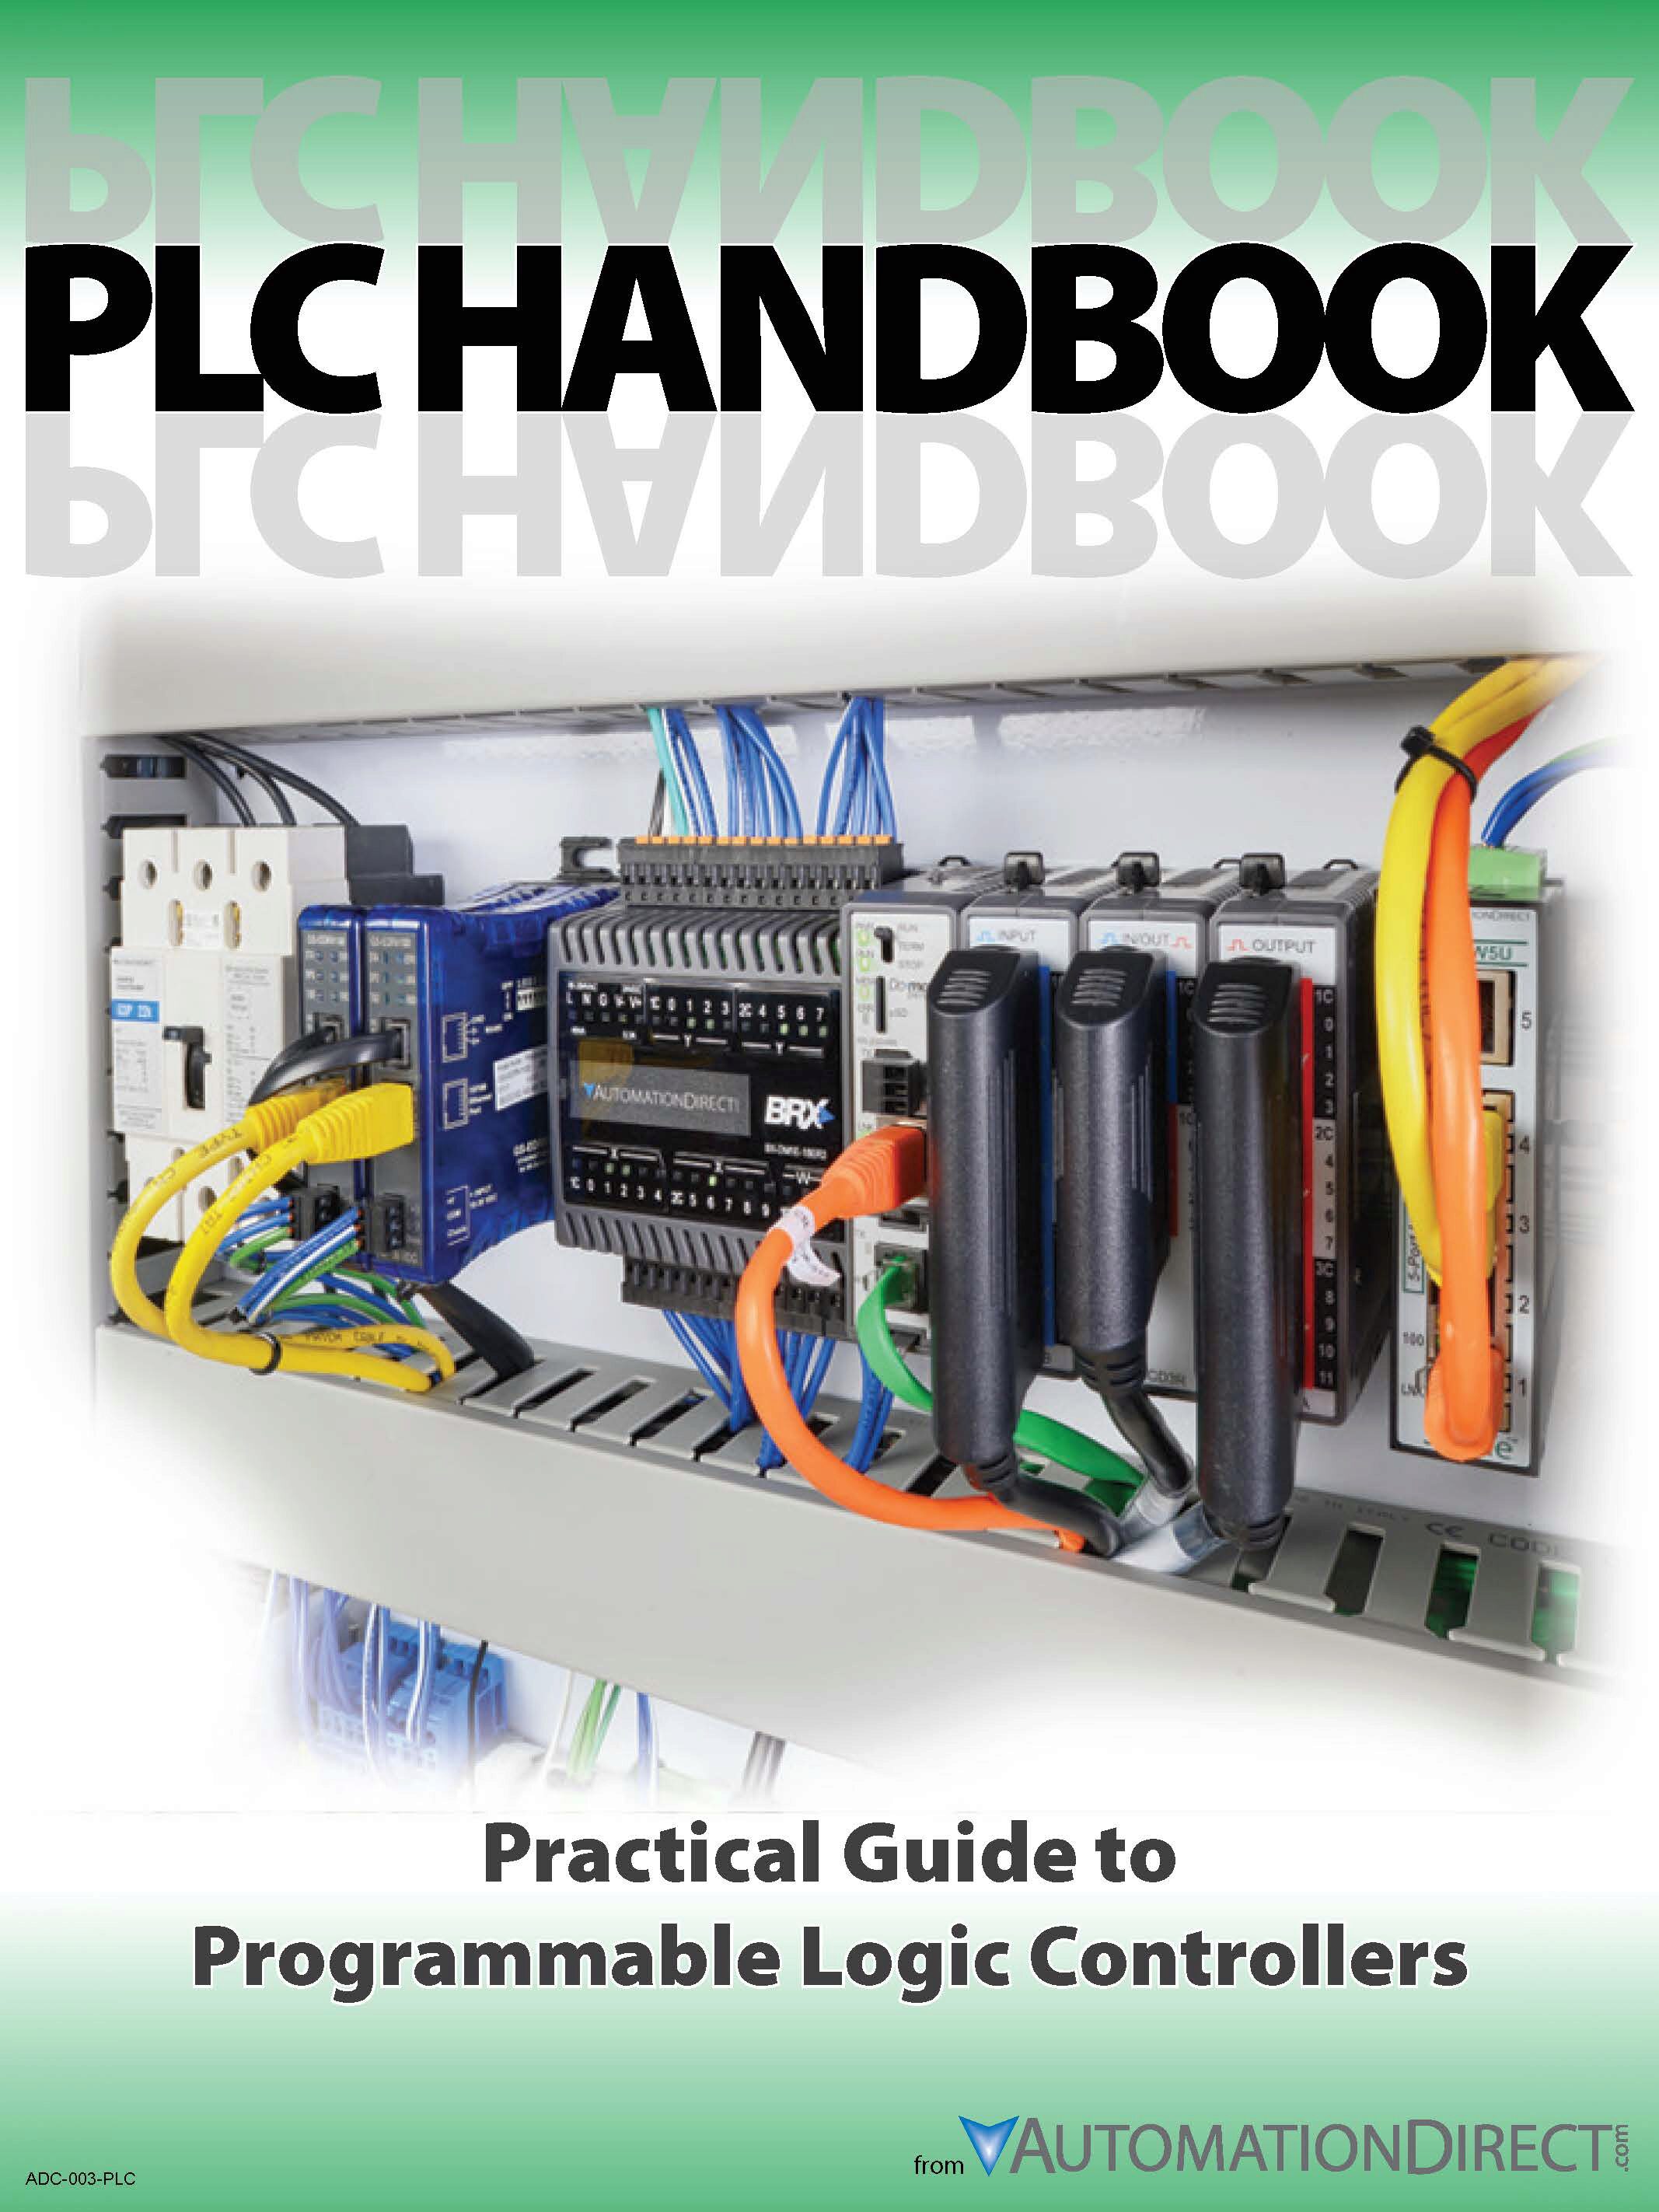 A Practical Guide to Programmable Logic Controllers